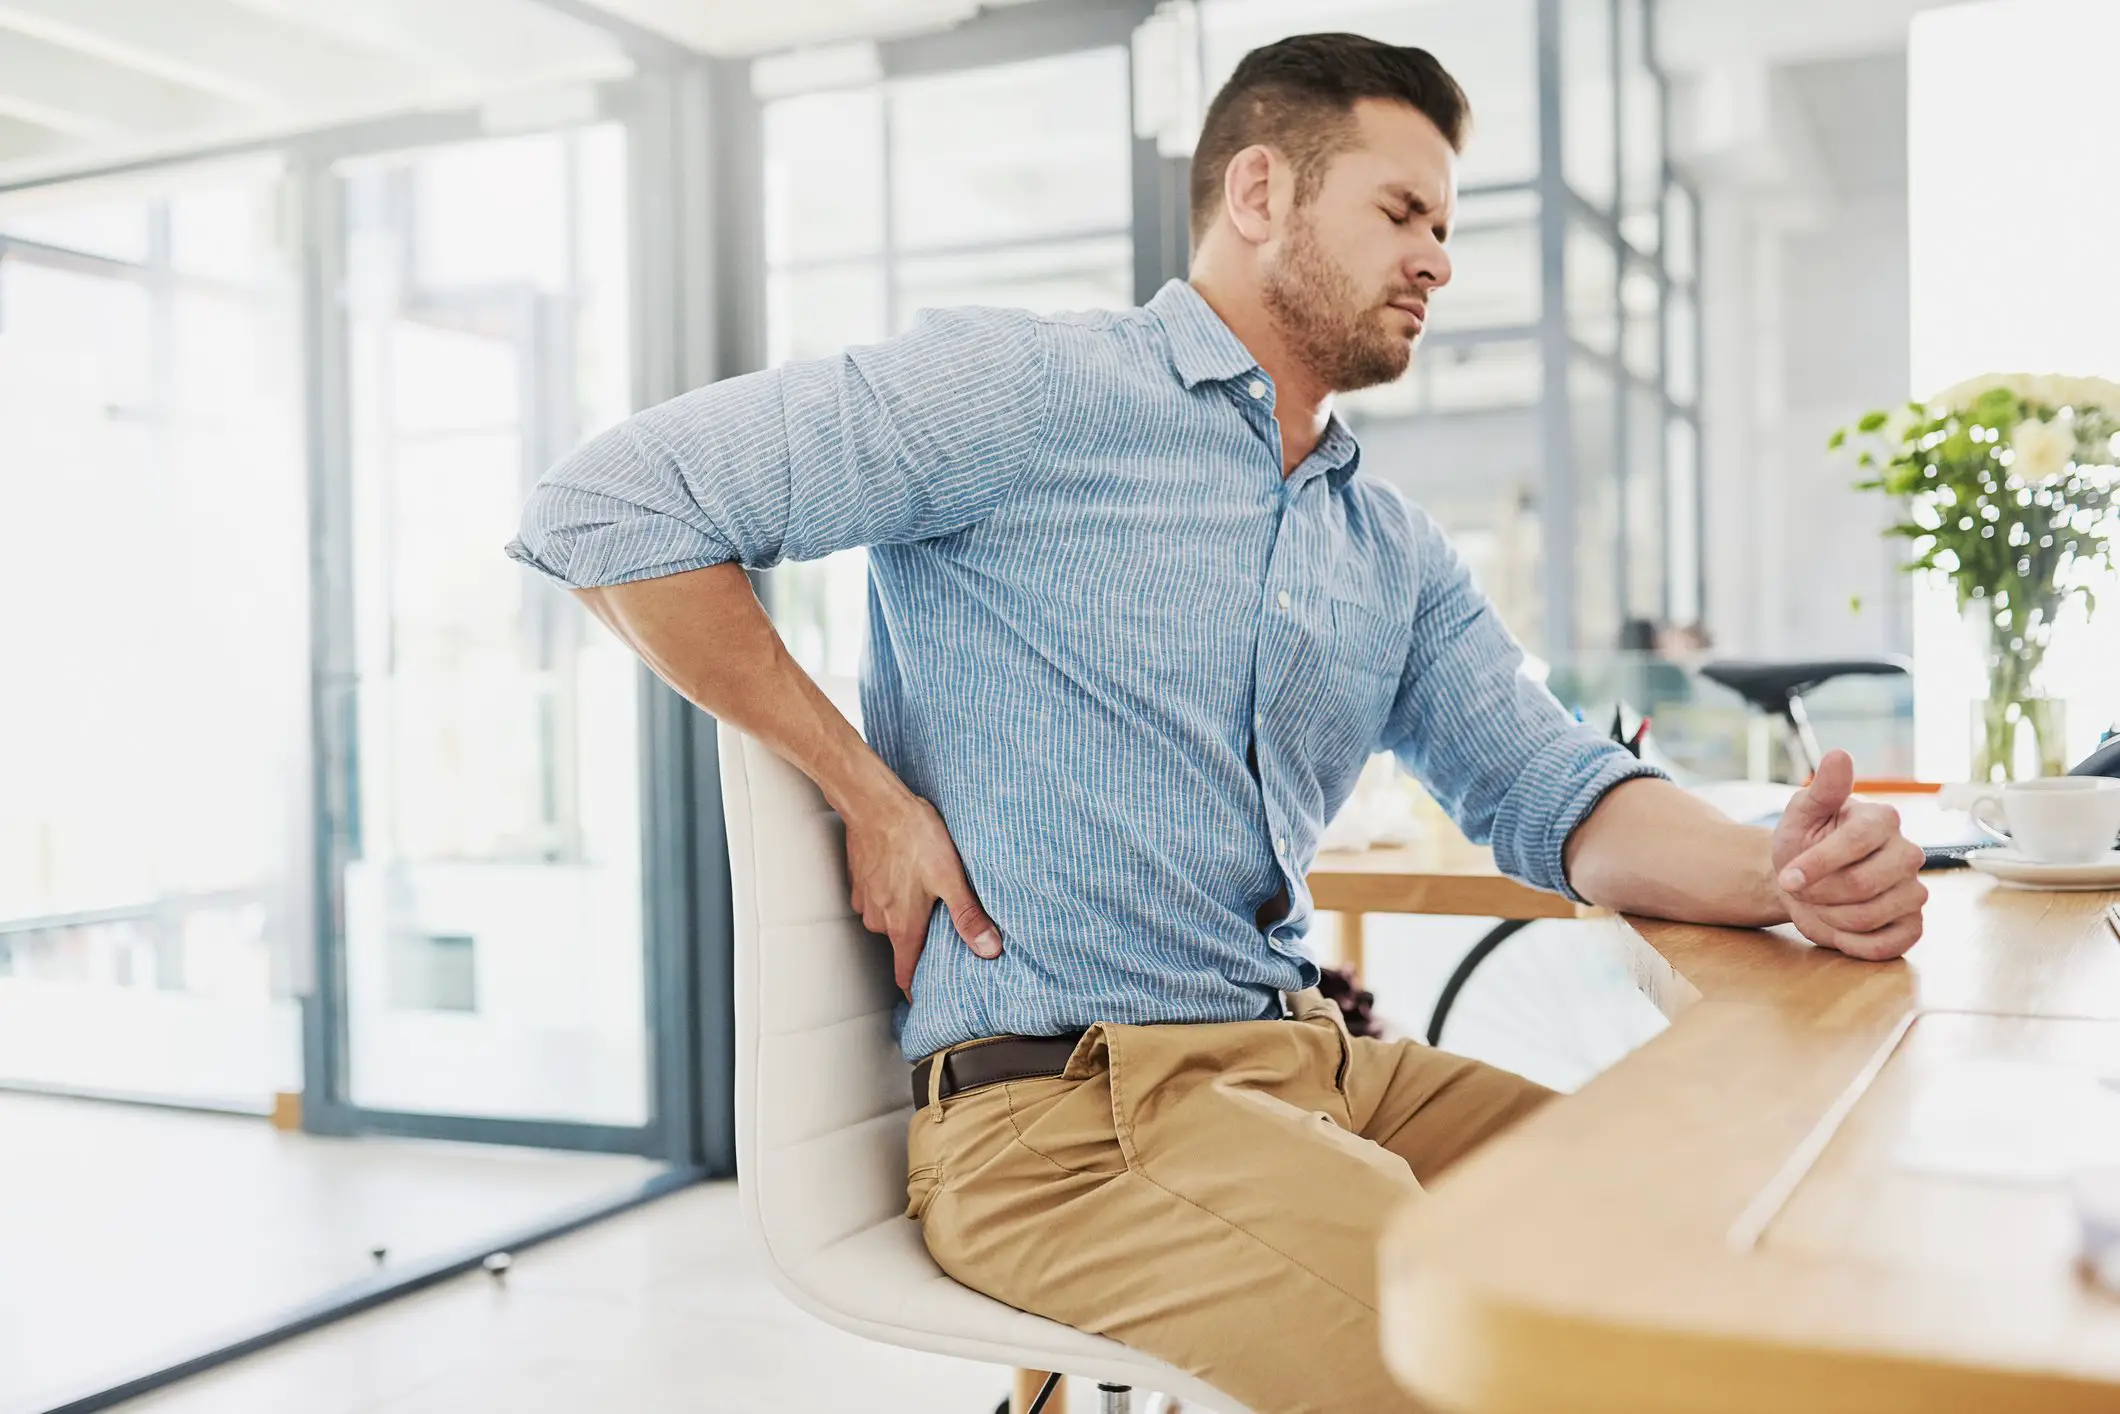 Can Sitting Cause Lower Back Pain?